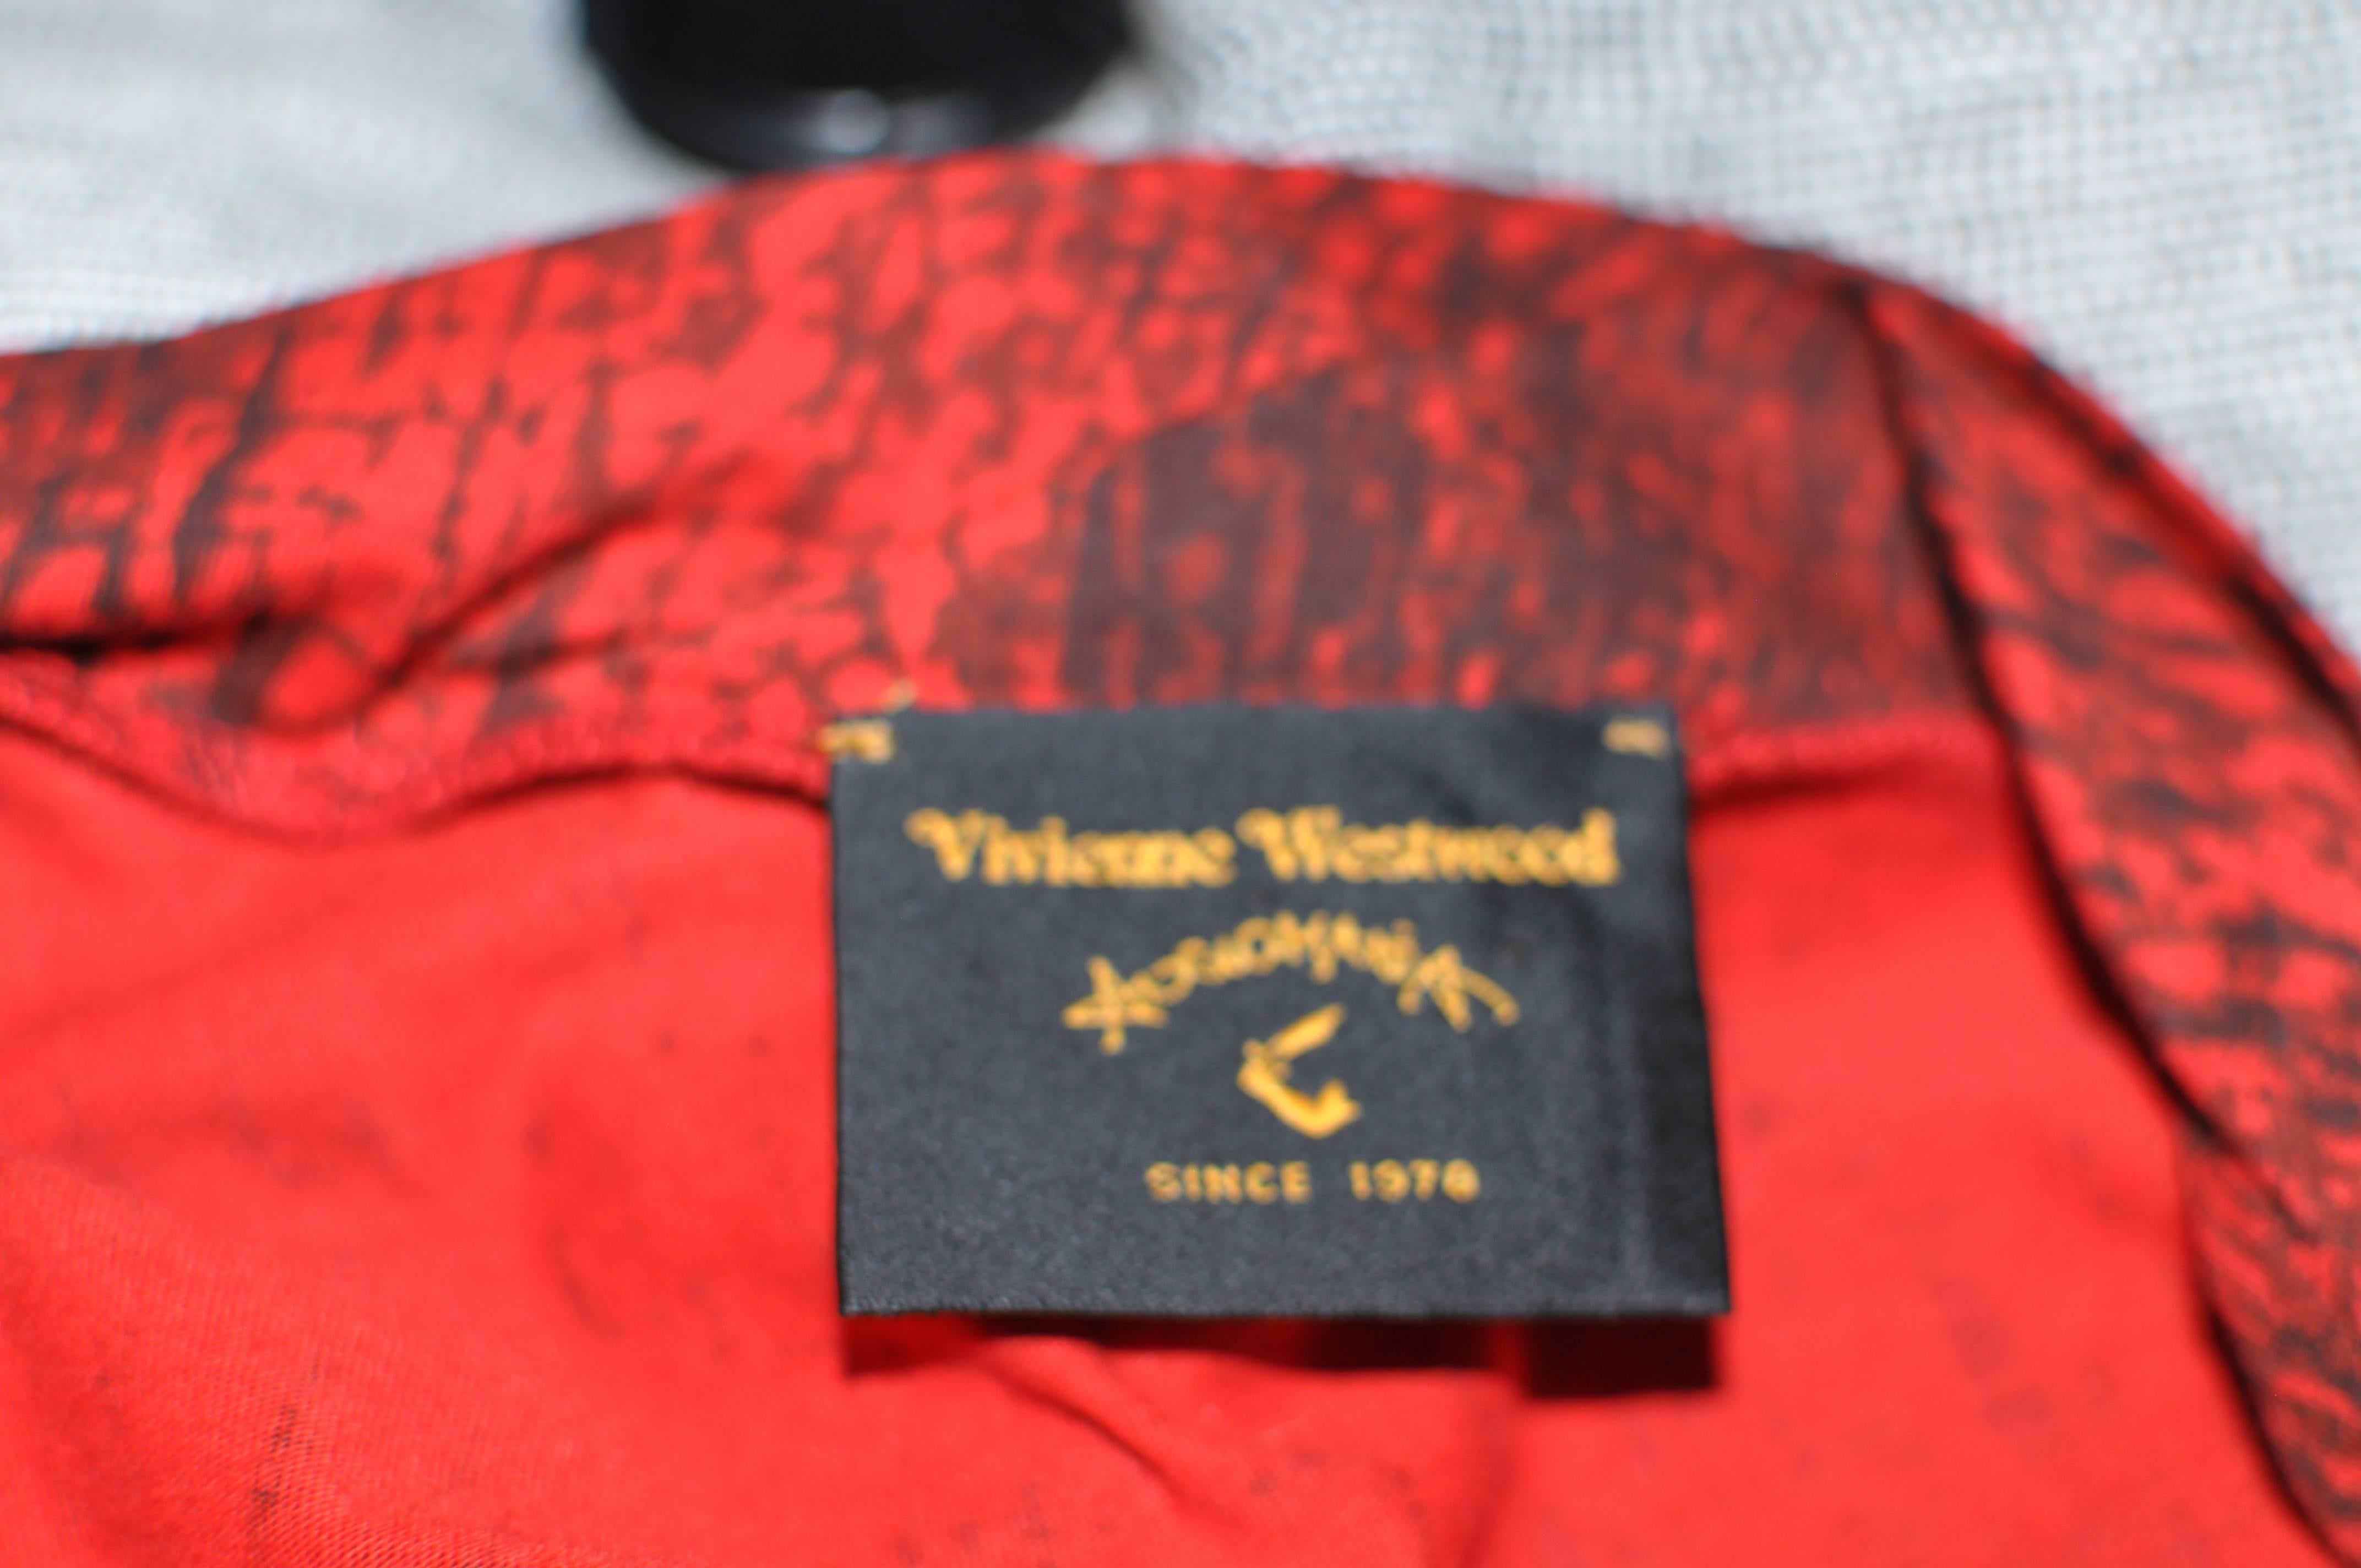 Vivienne Westwood Anglomania Dress, 1990s  For Sale 4